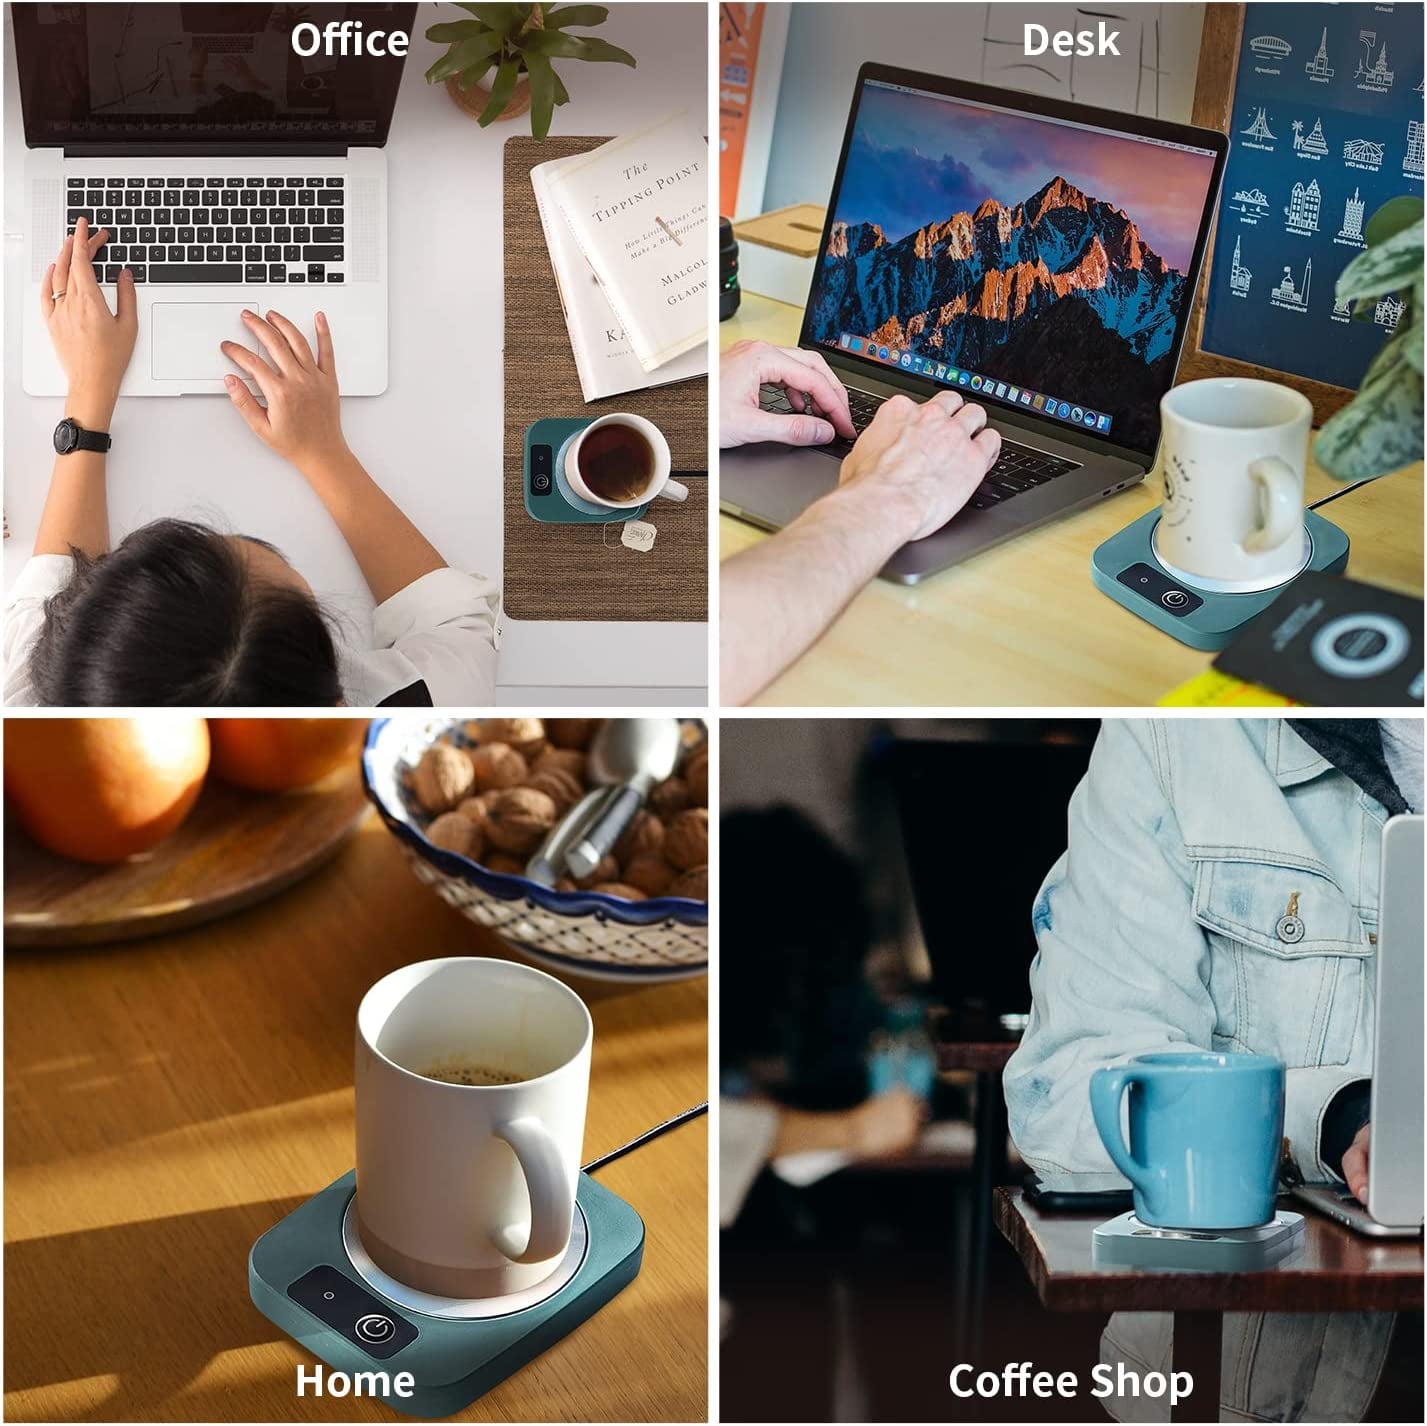 Coffee Mug Warmer - Electric Coffee Cup Warmer for Desk Auto Shut Off,  Temperature Setting Smart Coffee Mug Warme for Coffee, Tea, Water, Milk and  Coco, Coffee Warmer Gifts for mom (No Cup) $19.99 For  USA Testers  inbox me if you are